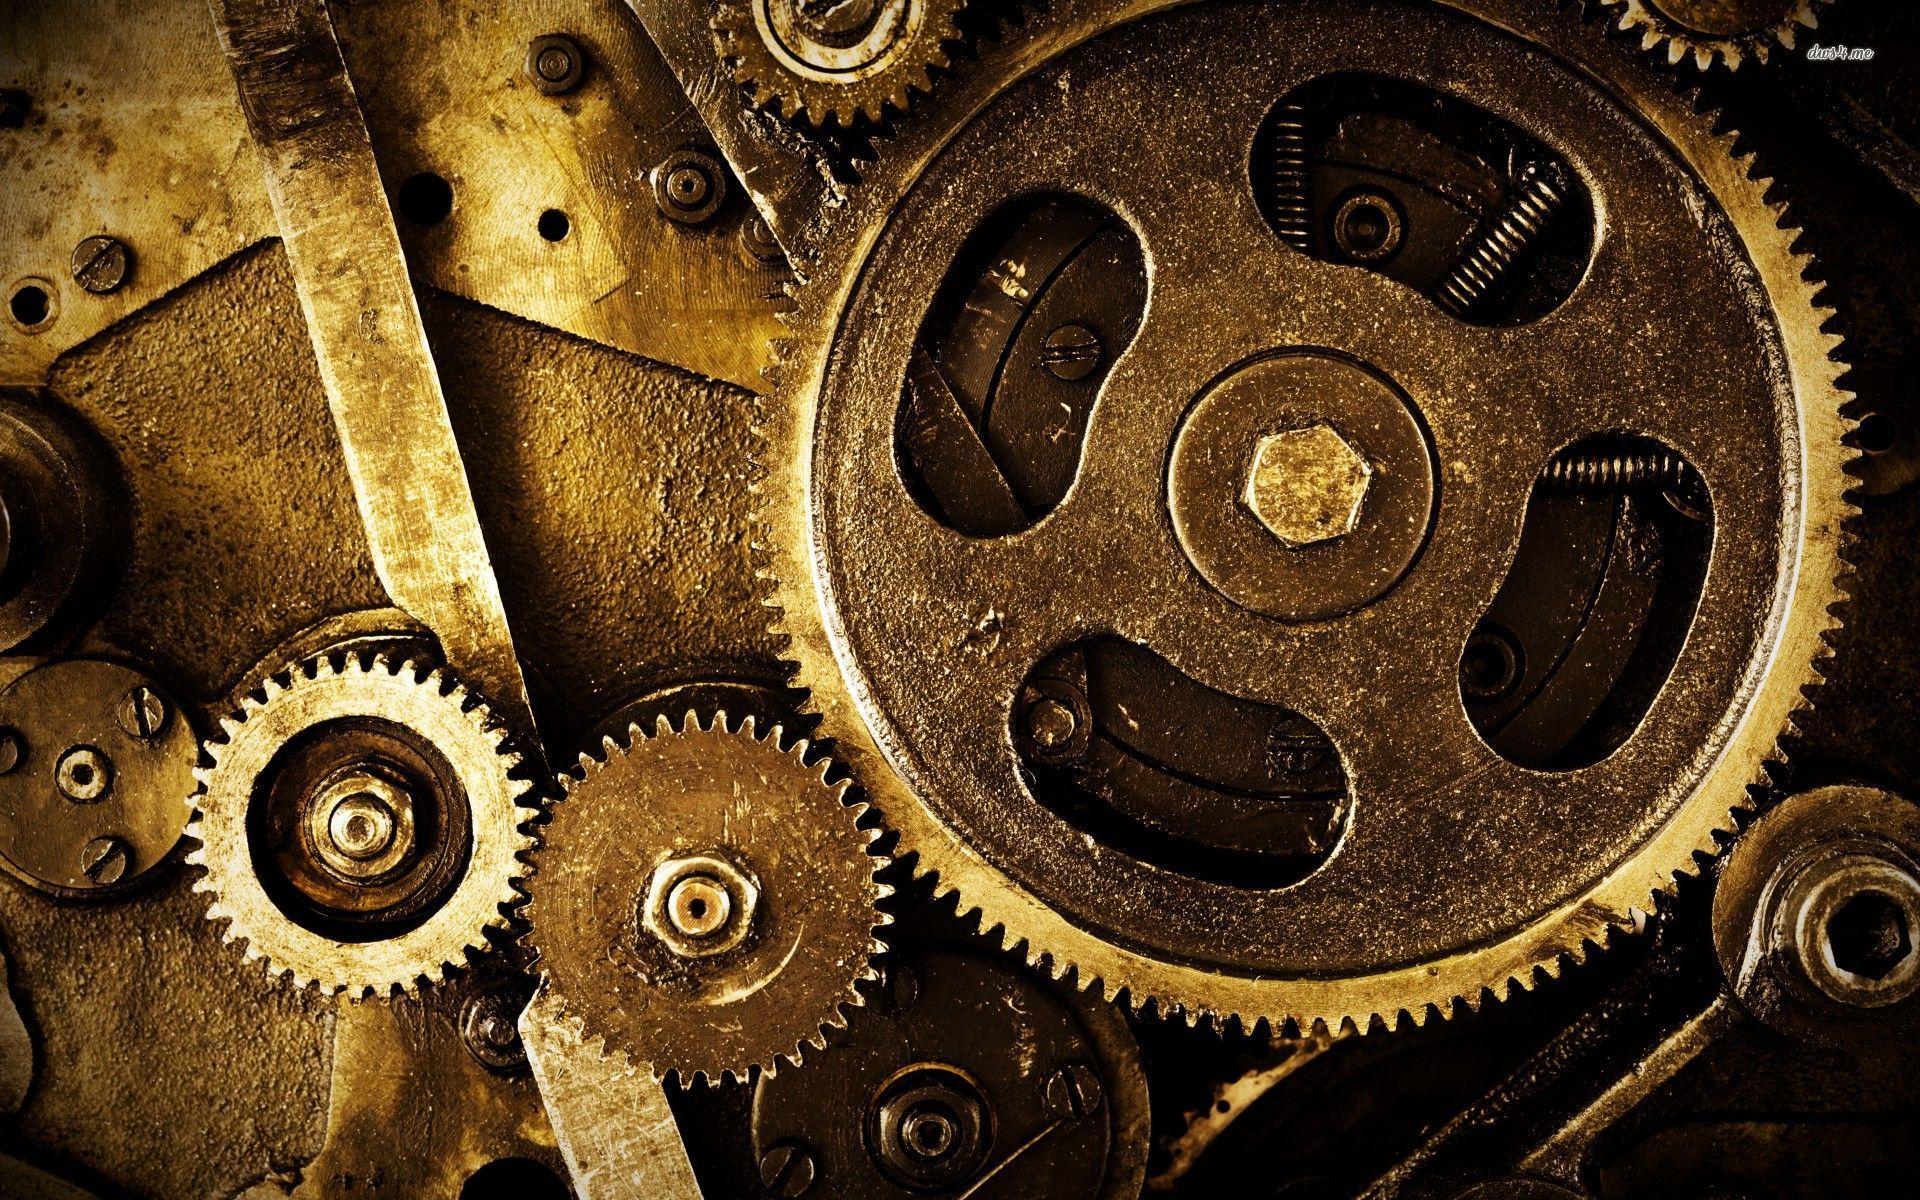 Mechanical Gears Wallpaper HD A Machine Is Any Device